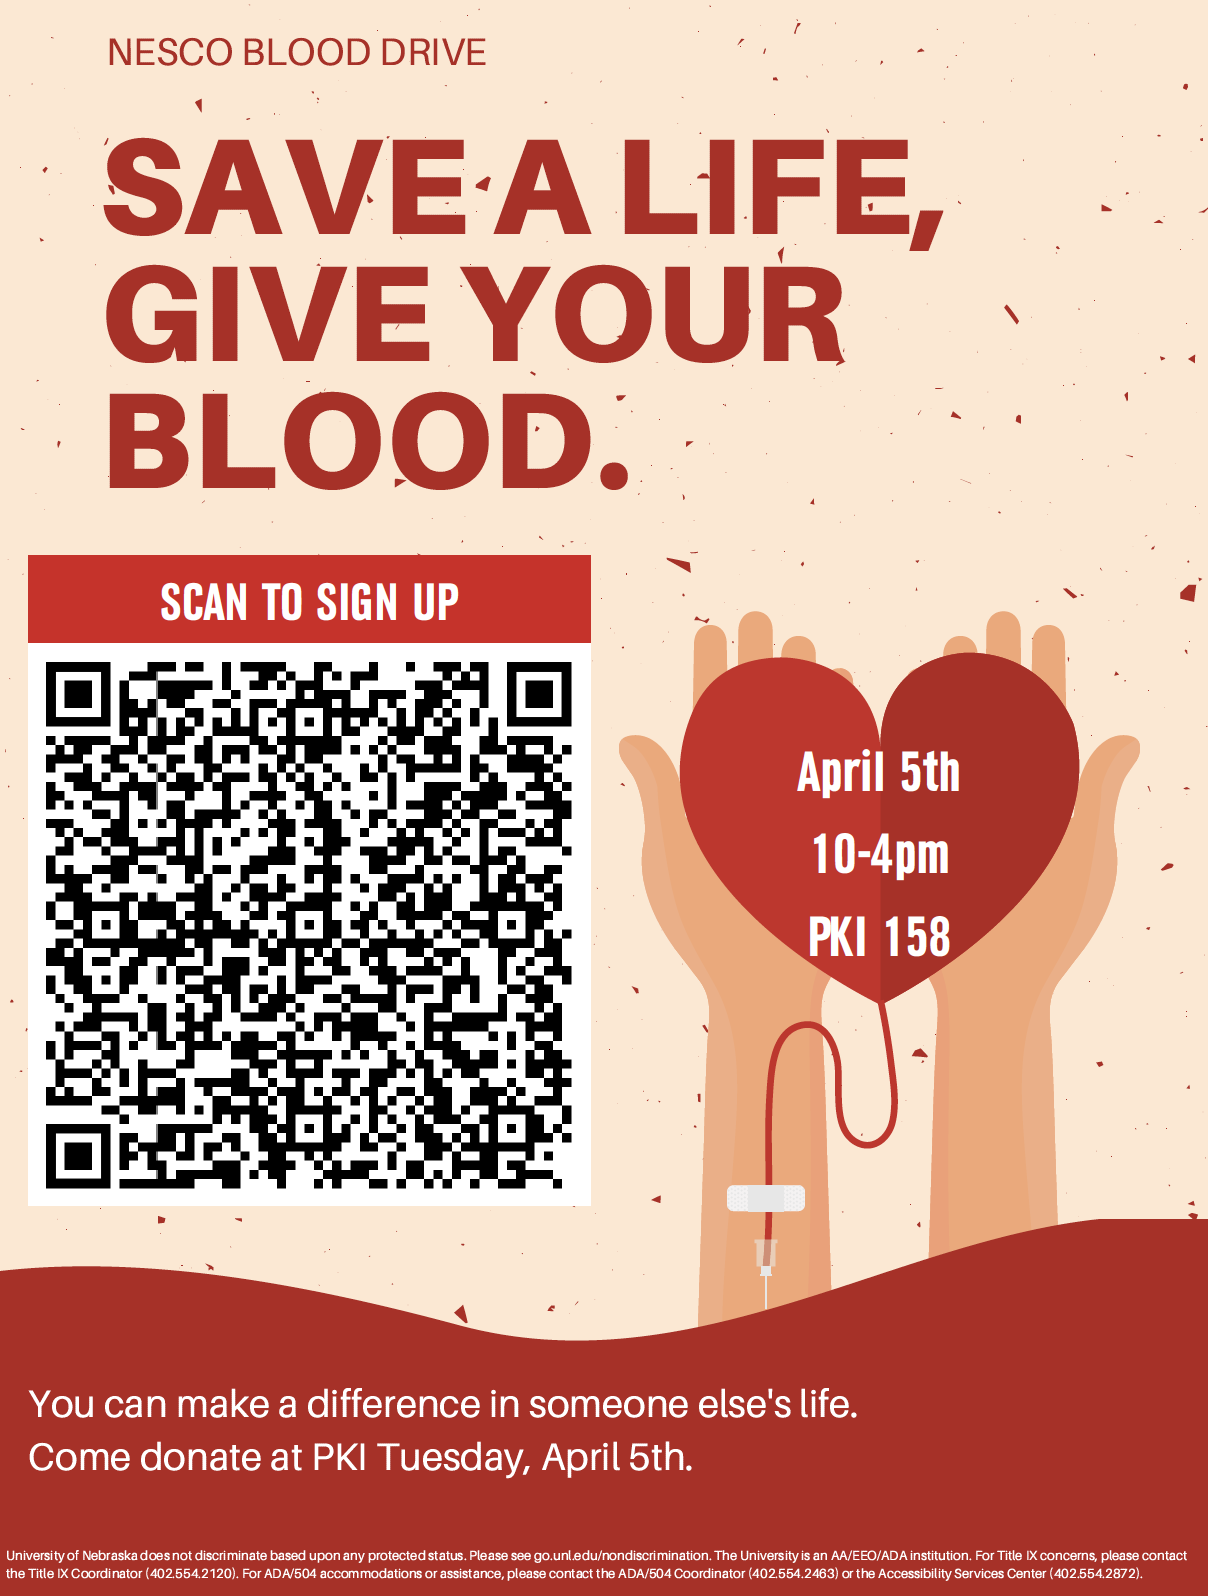 NESCO Blood Drive is Tuesday, April 5.